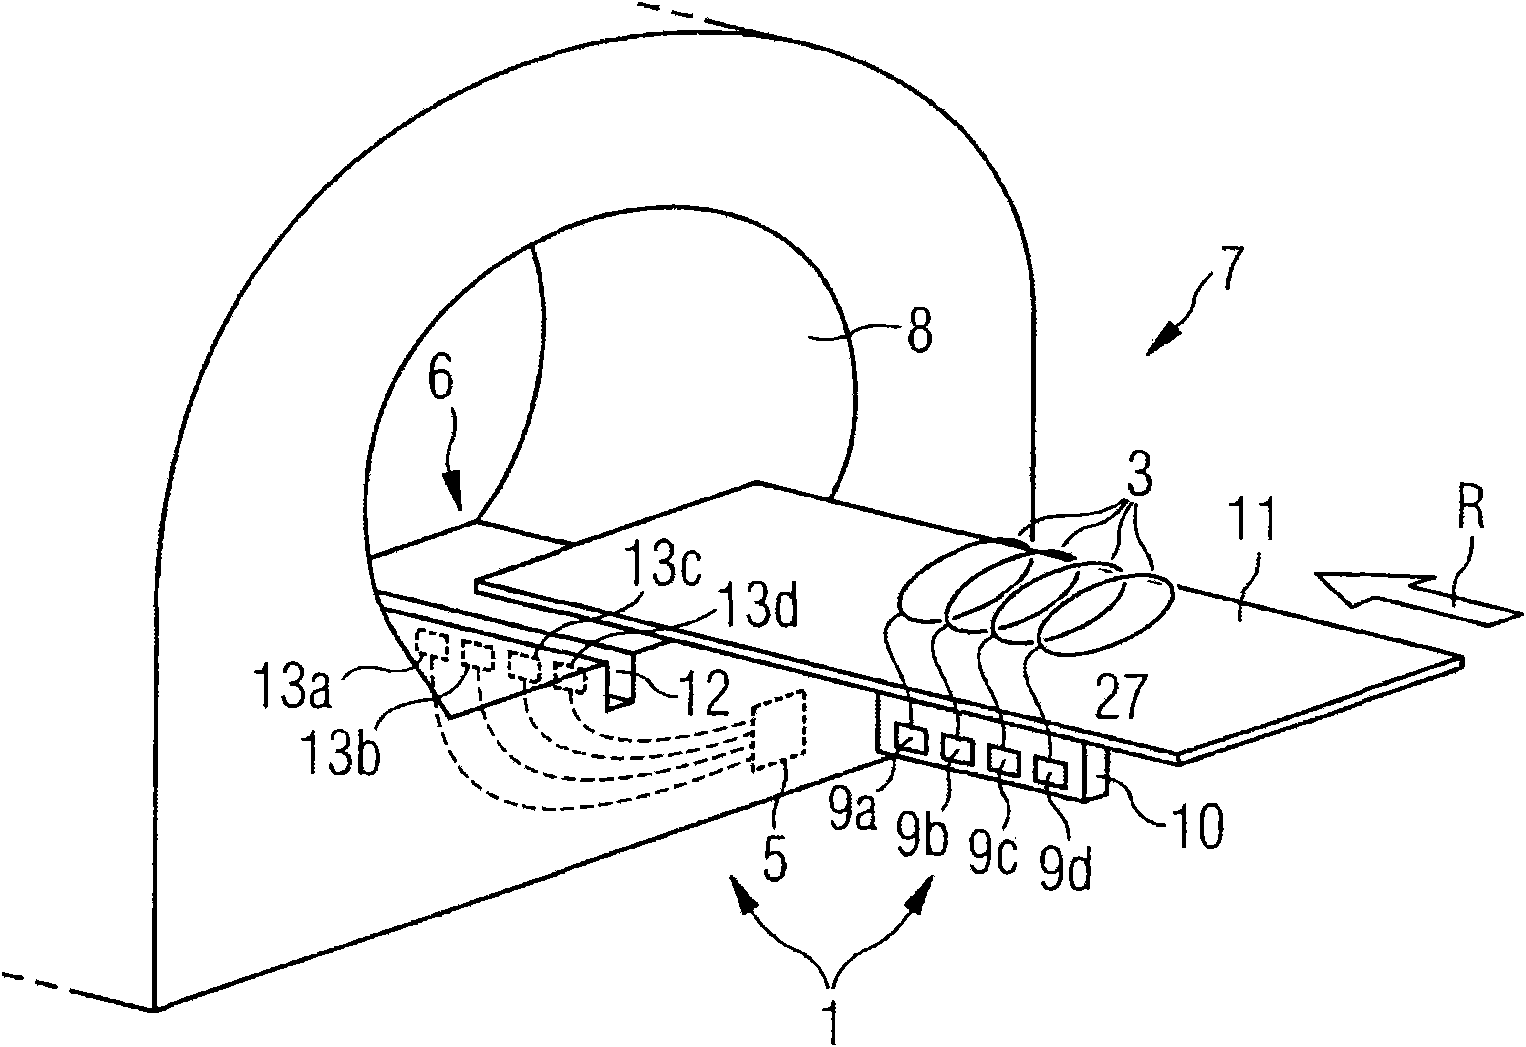 System and method for electrically contacting local coils with a signal processor remote therefrom in a magnetic resonance scanner